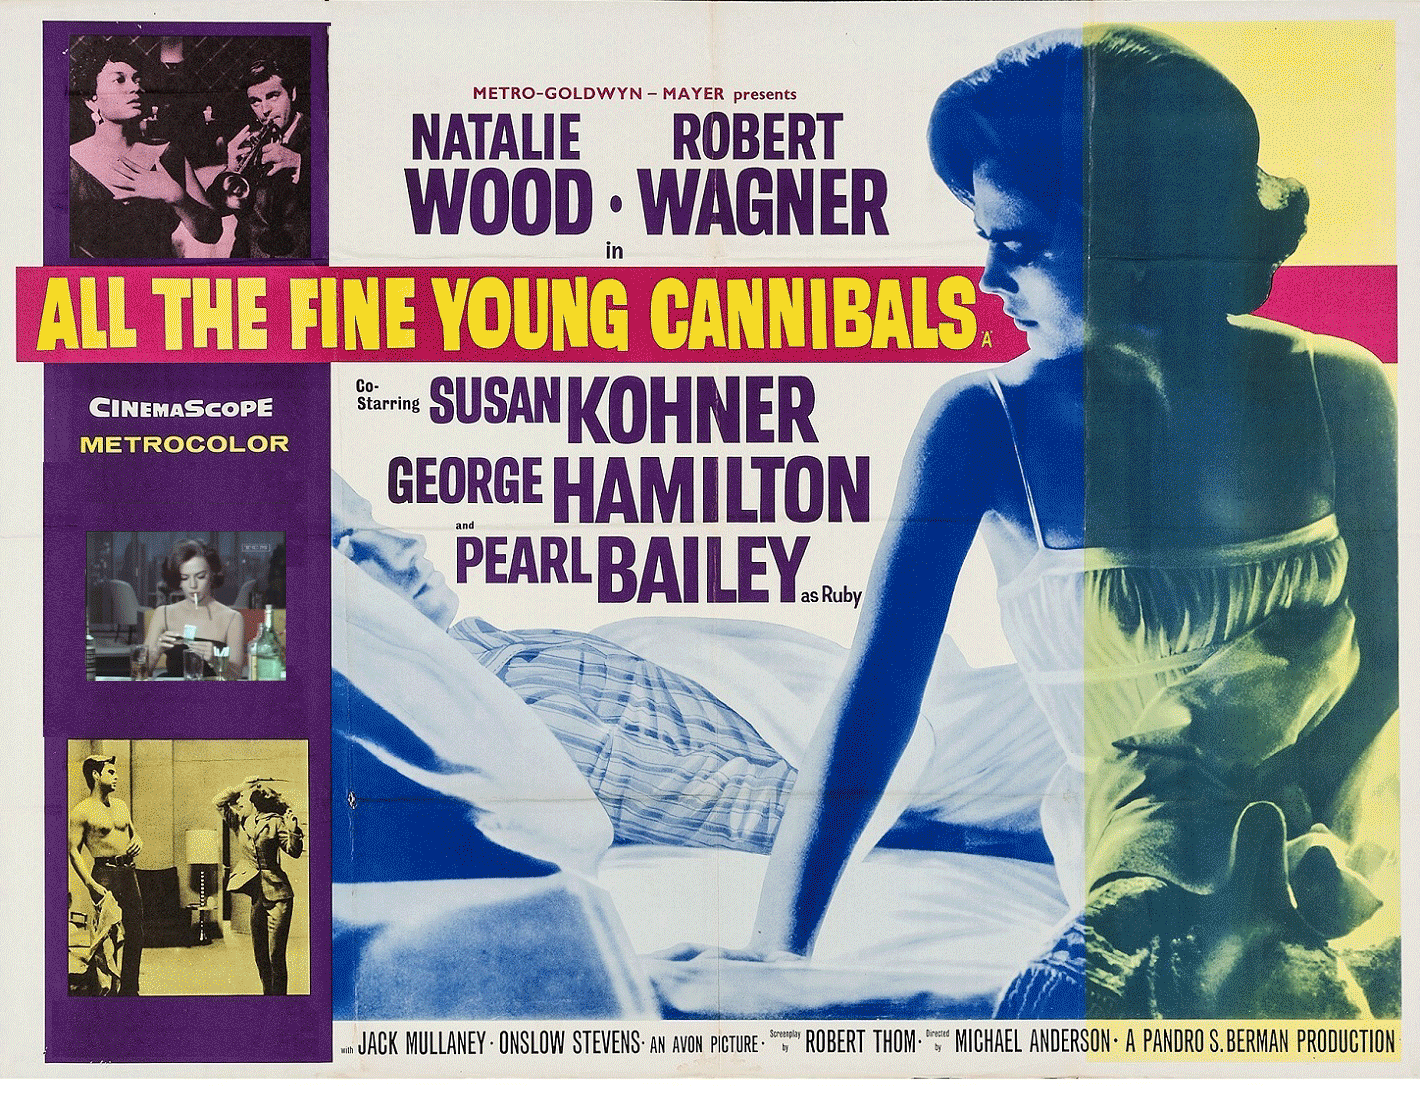 ALL THE FINE YOUNG CANNIBALS (1960) WEB SITE